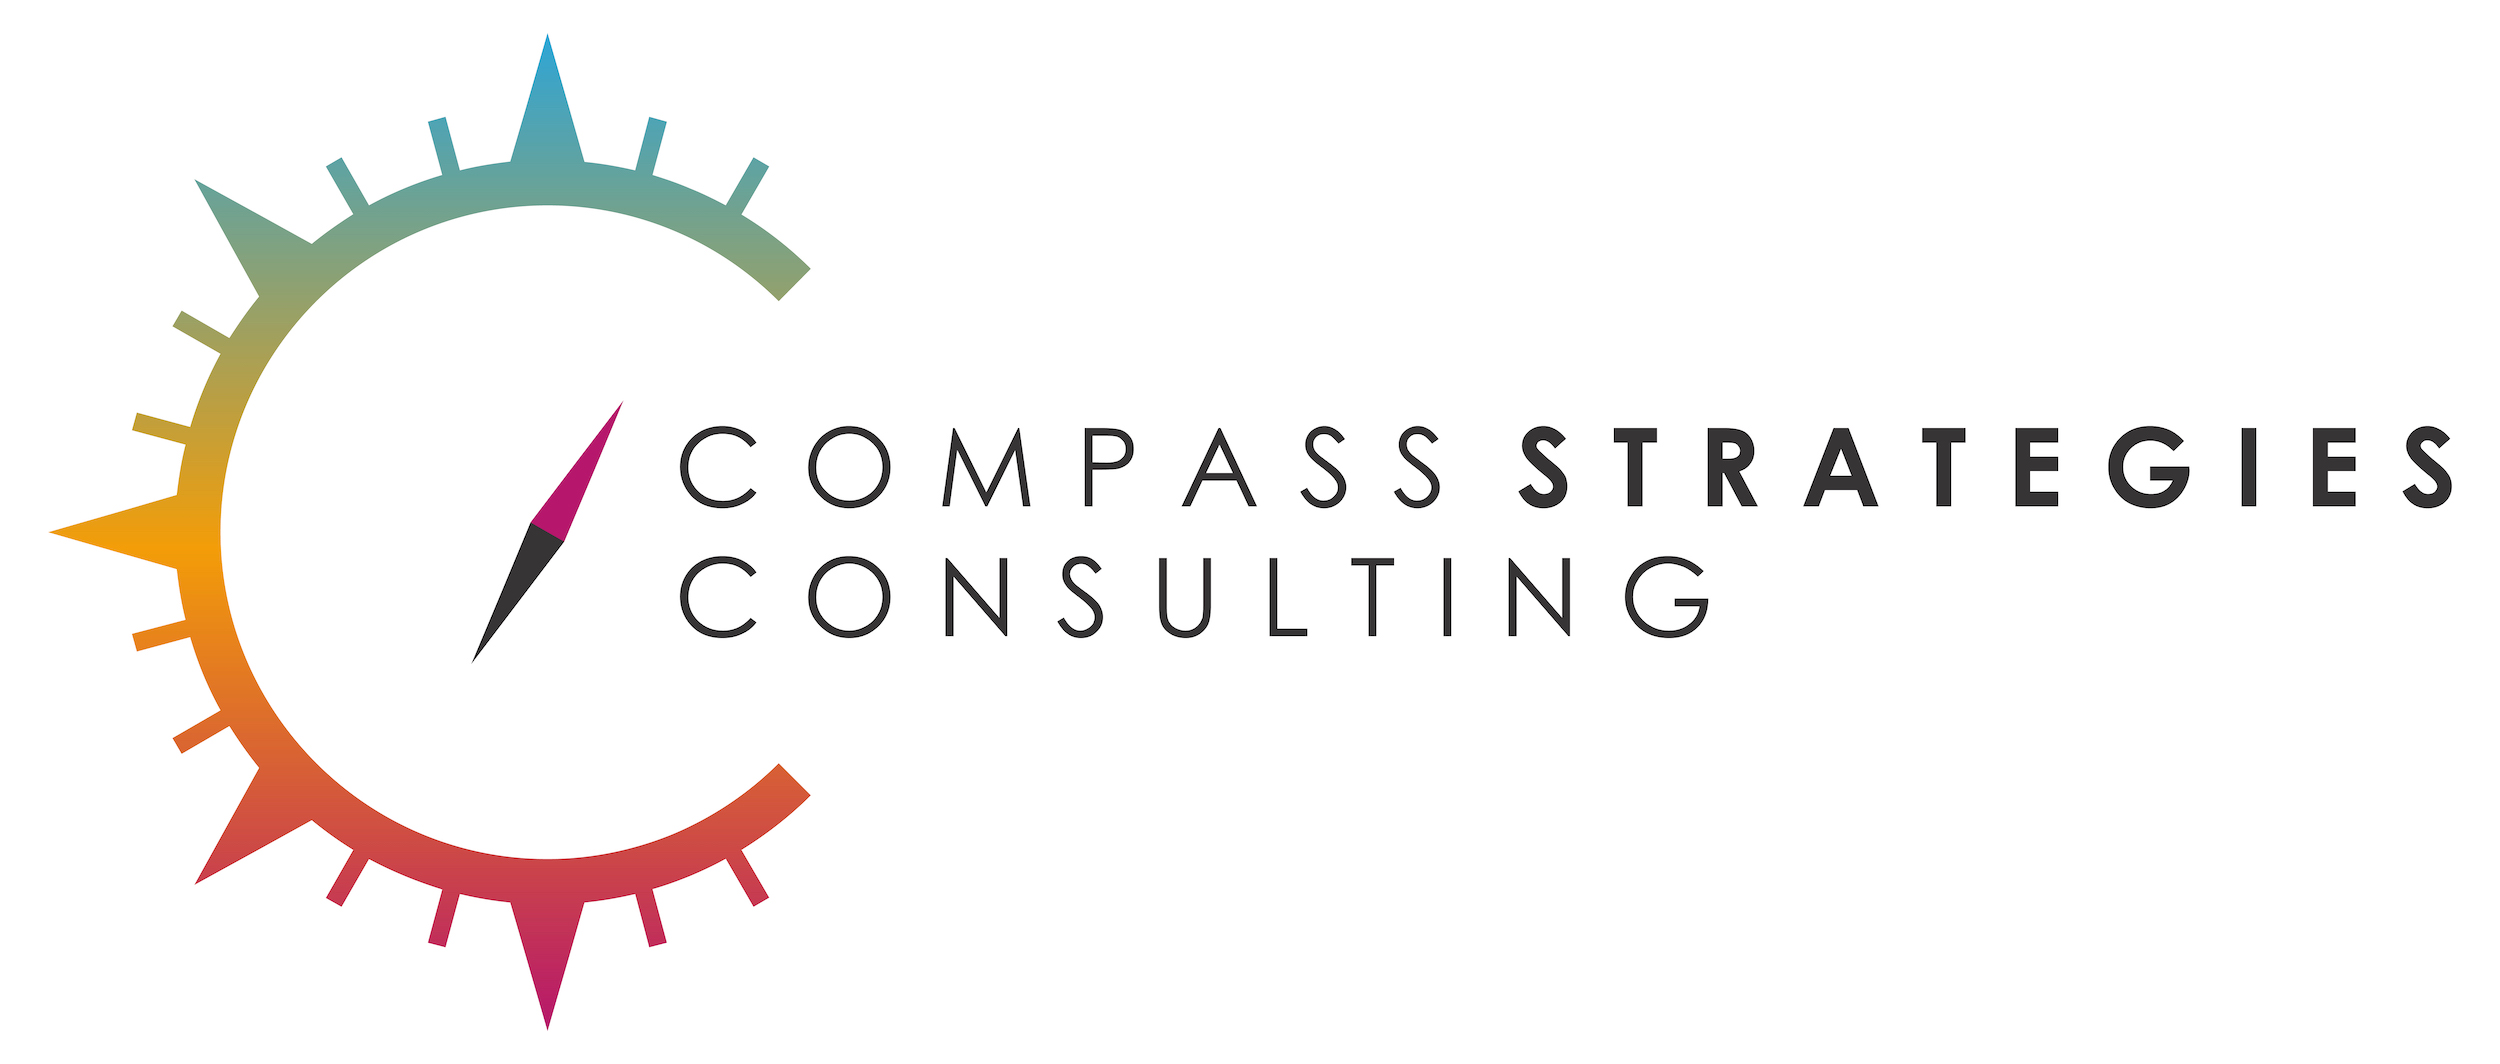 Compass Strategies Consulting